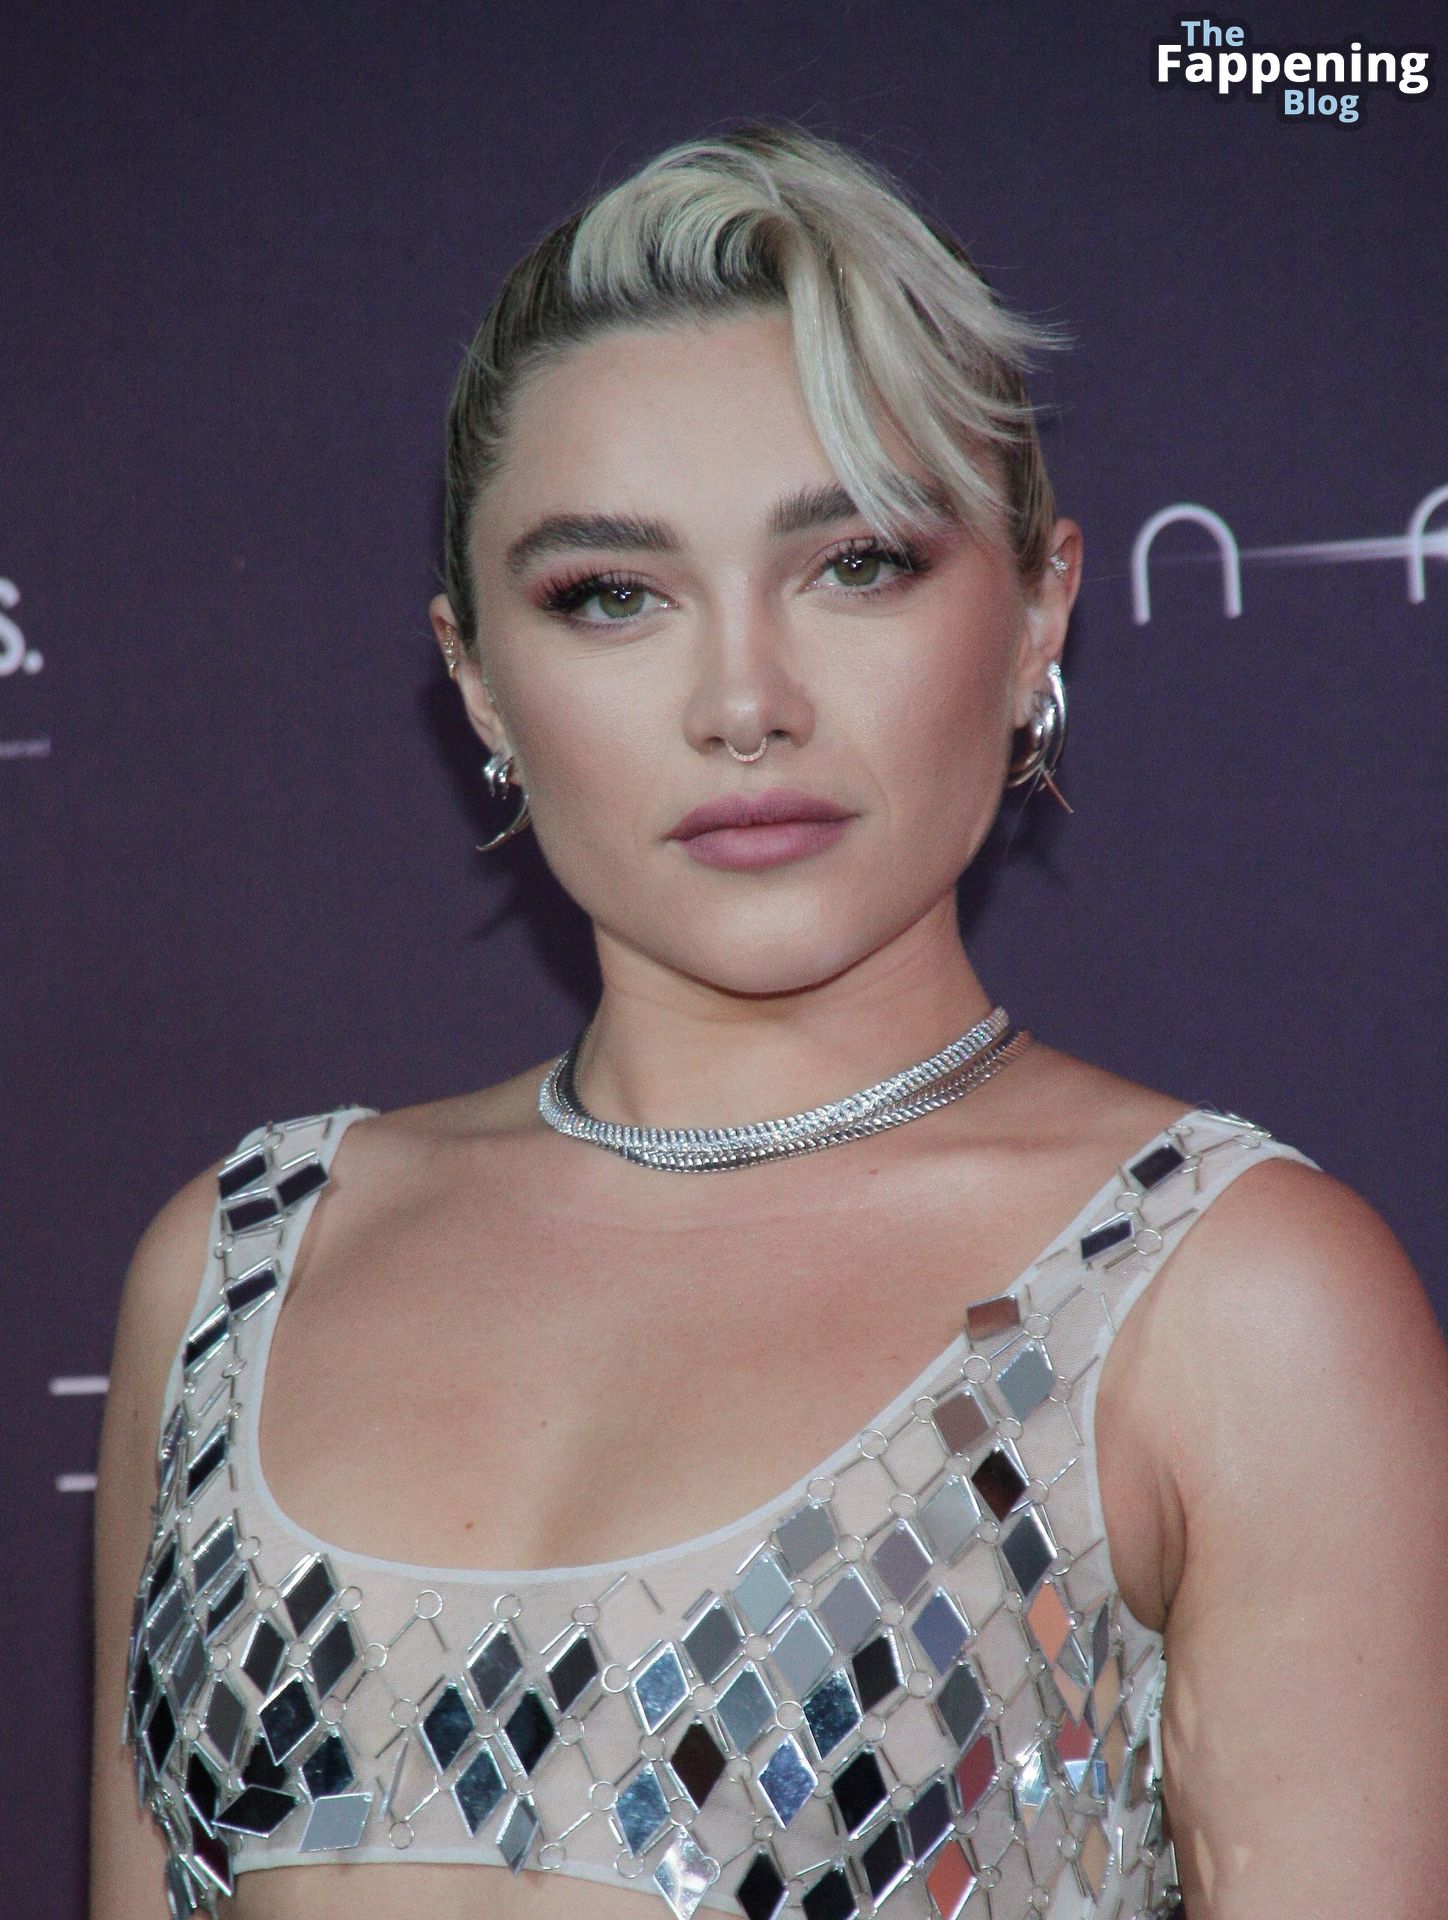 Florence-Pugh-Sexy-27-The-Fappening-Blog.jpg